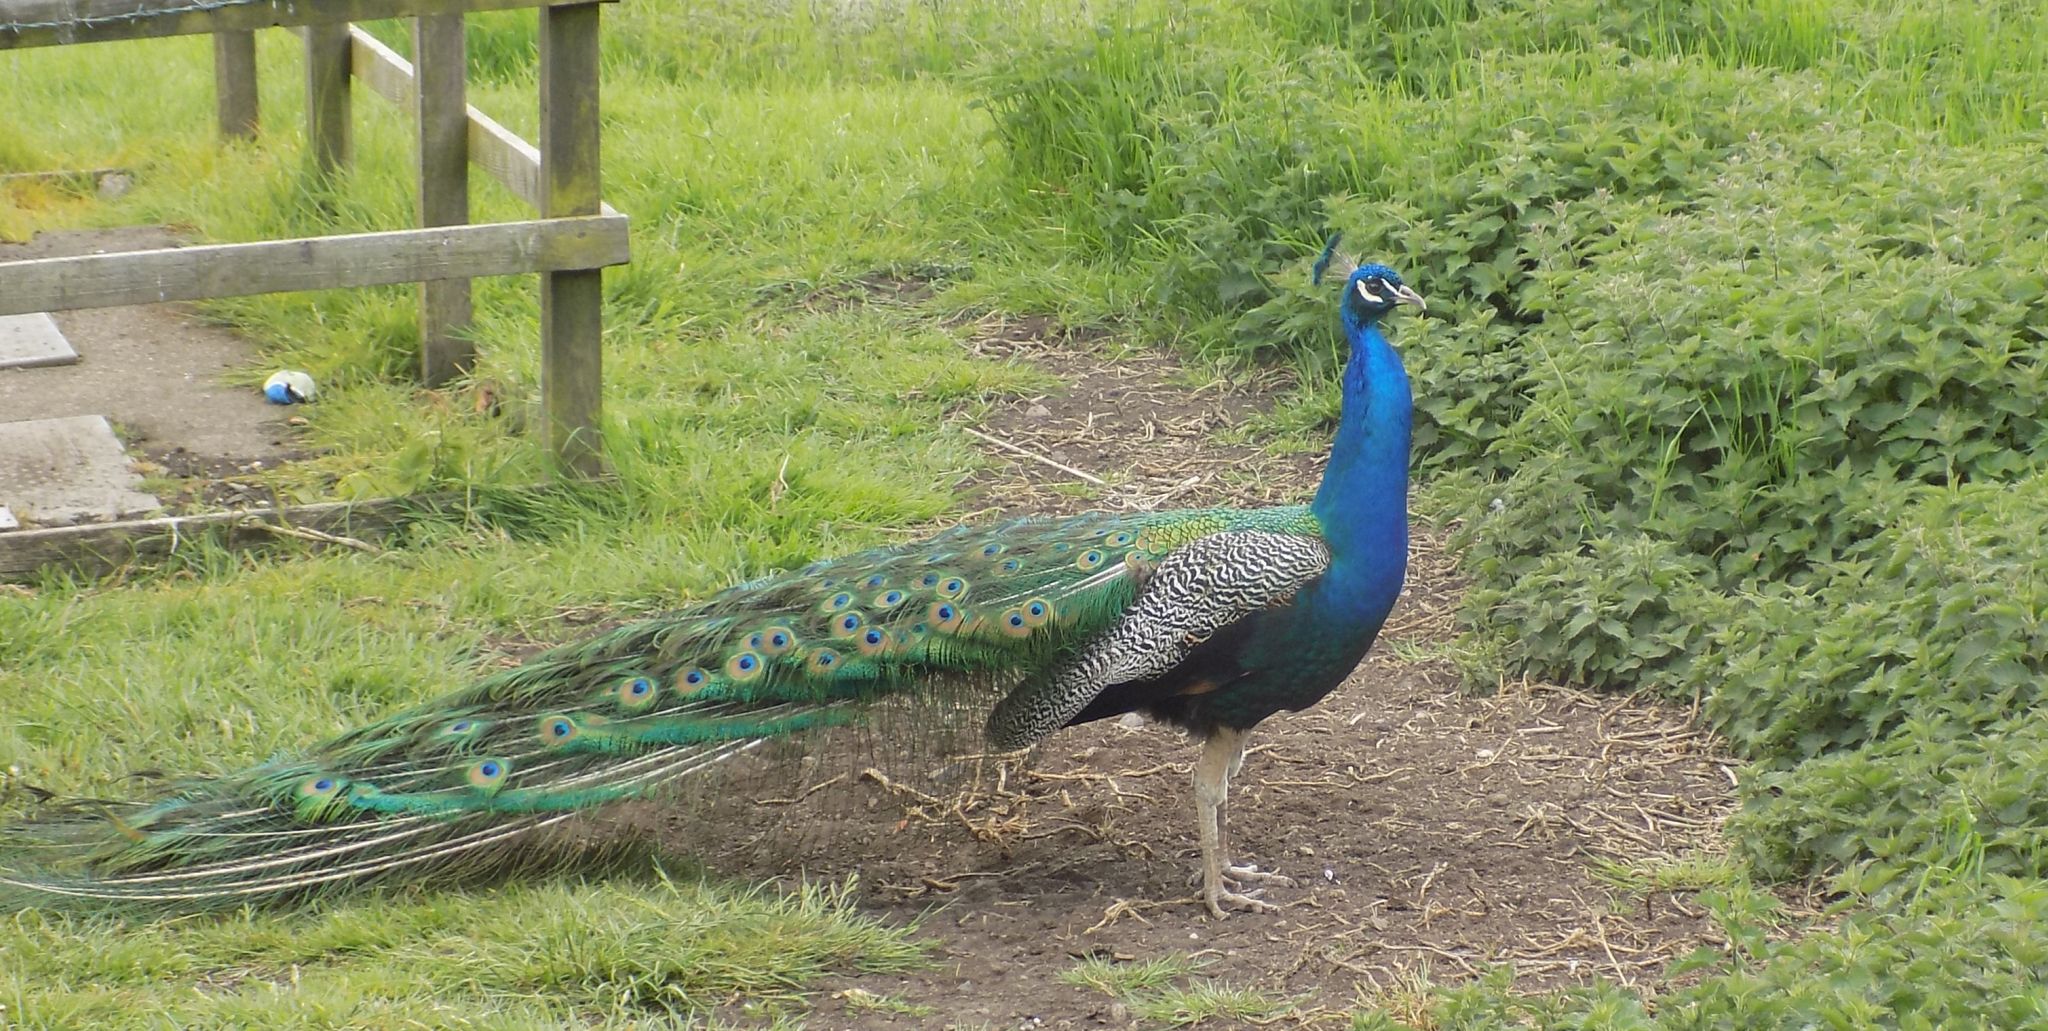 Peacock at House of the Binns